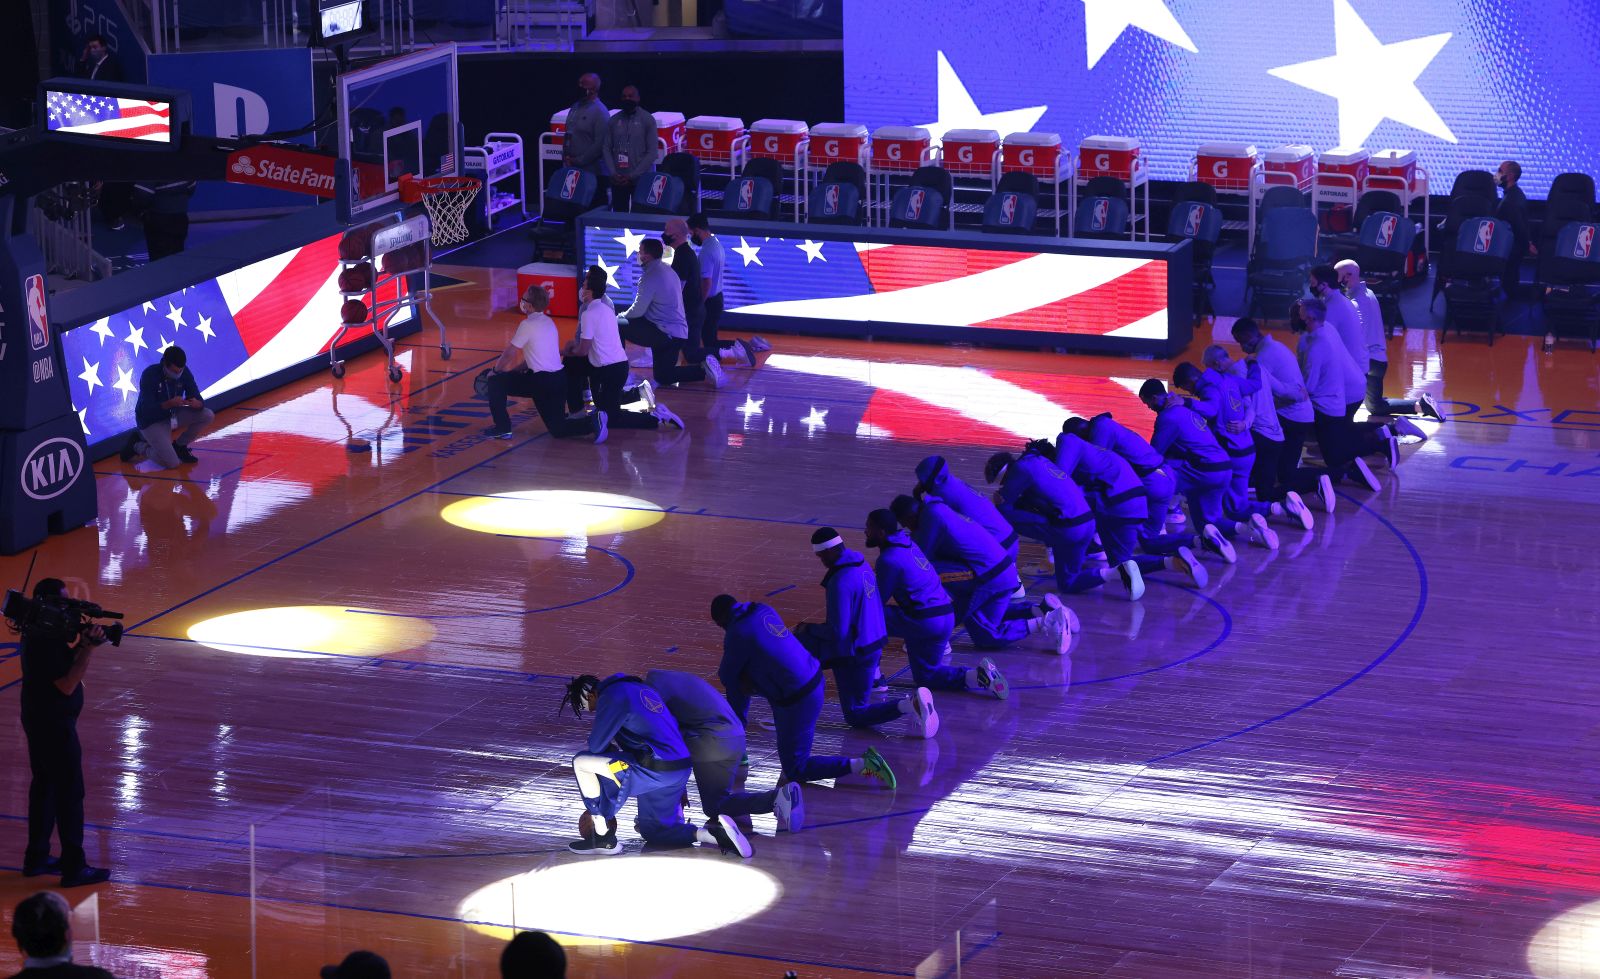 epa08923959 Members Golden State Warriors and the of the Los Angeles Clippers (not pictured) take a knee during the national anthem reacting to the news that the Kenosha County District officer who shot Jacob BLos Angeleske will not be charged, prior to the start of the NBA match between Los Angeles Clippers and Golden State Warriors at Chase Center in San Francisco, California, USA, 06 January 2021.  EPA/JOHN G. MABANGLO SHUTTERSTOCK OUT